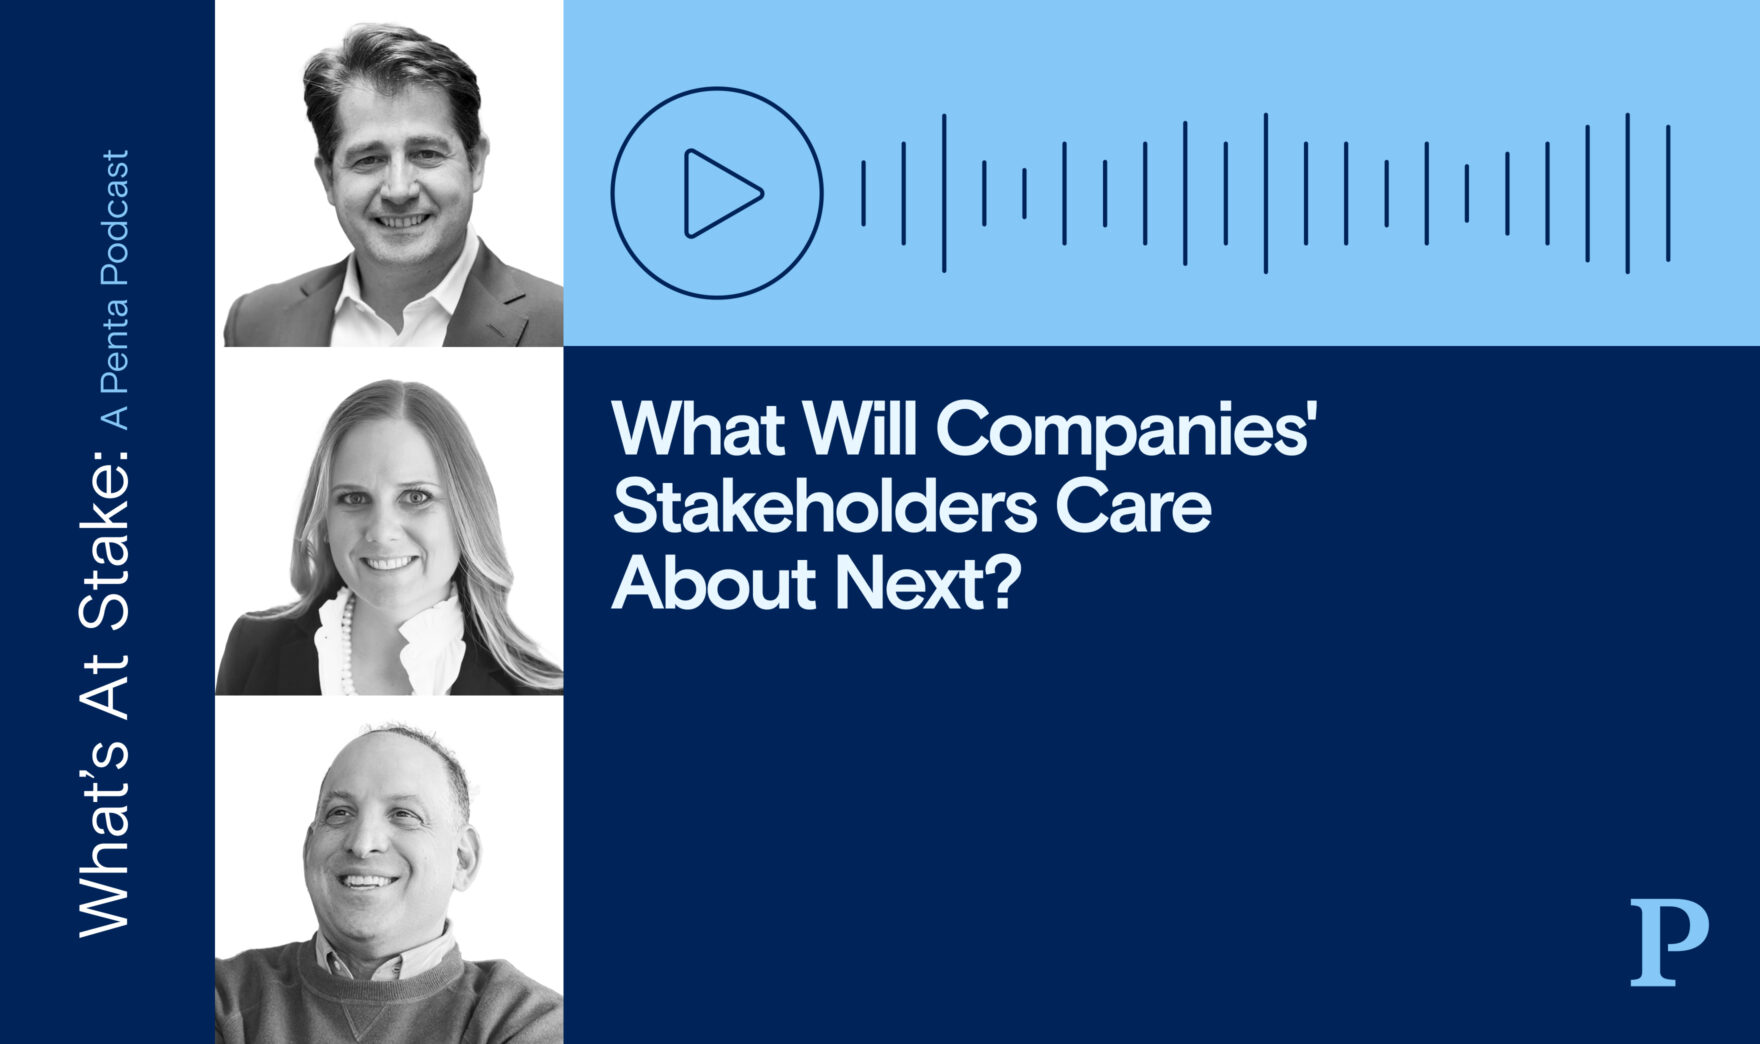 What Will Companies’ Stakeholders Care About Next?